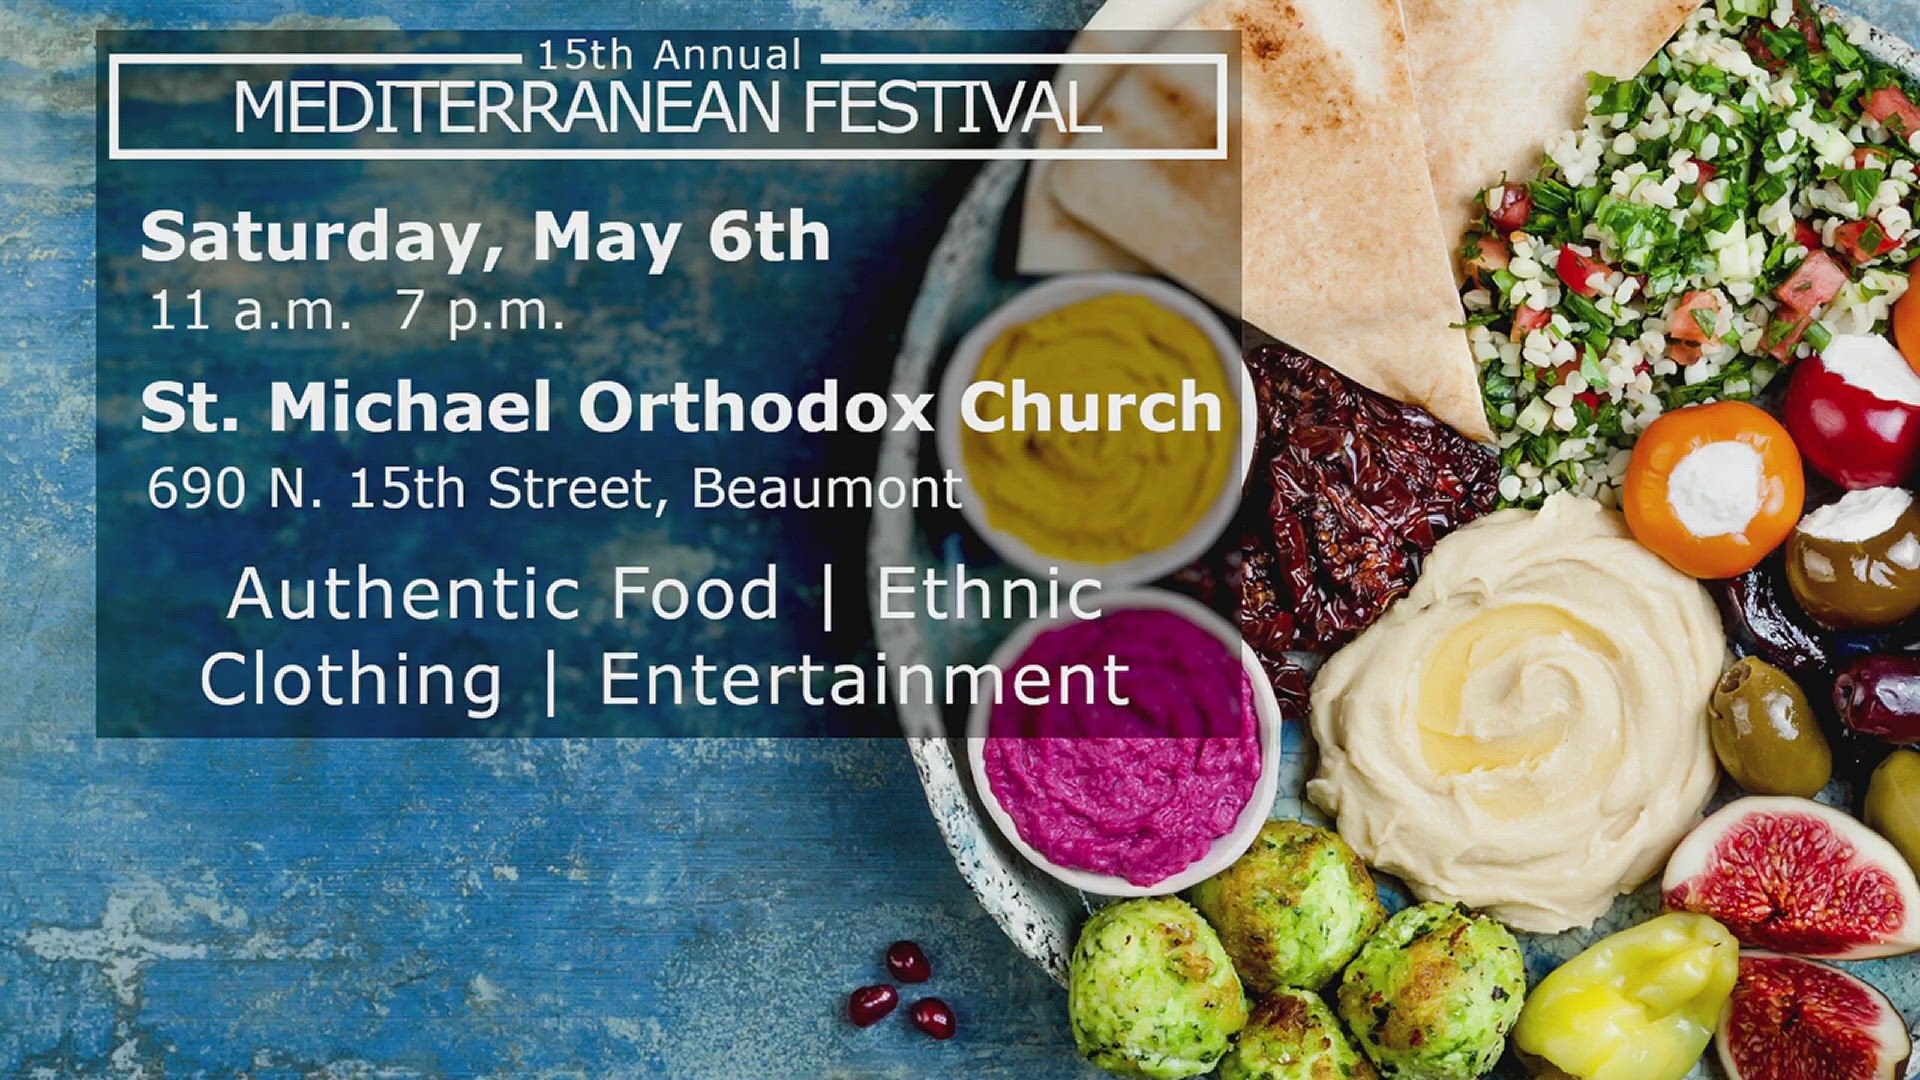 The event kicks off at 11 a.m. at the St. Michael Orthodox Church.